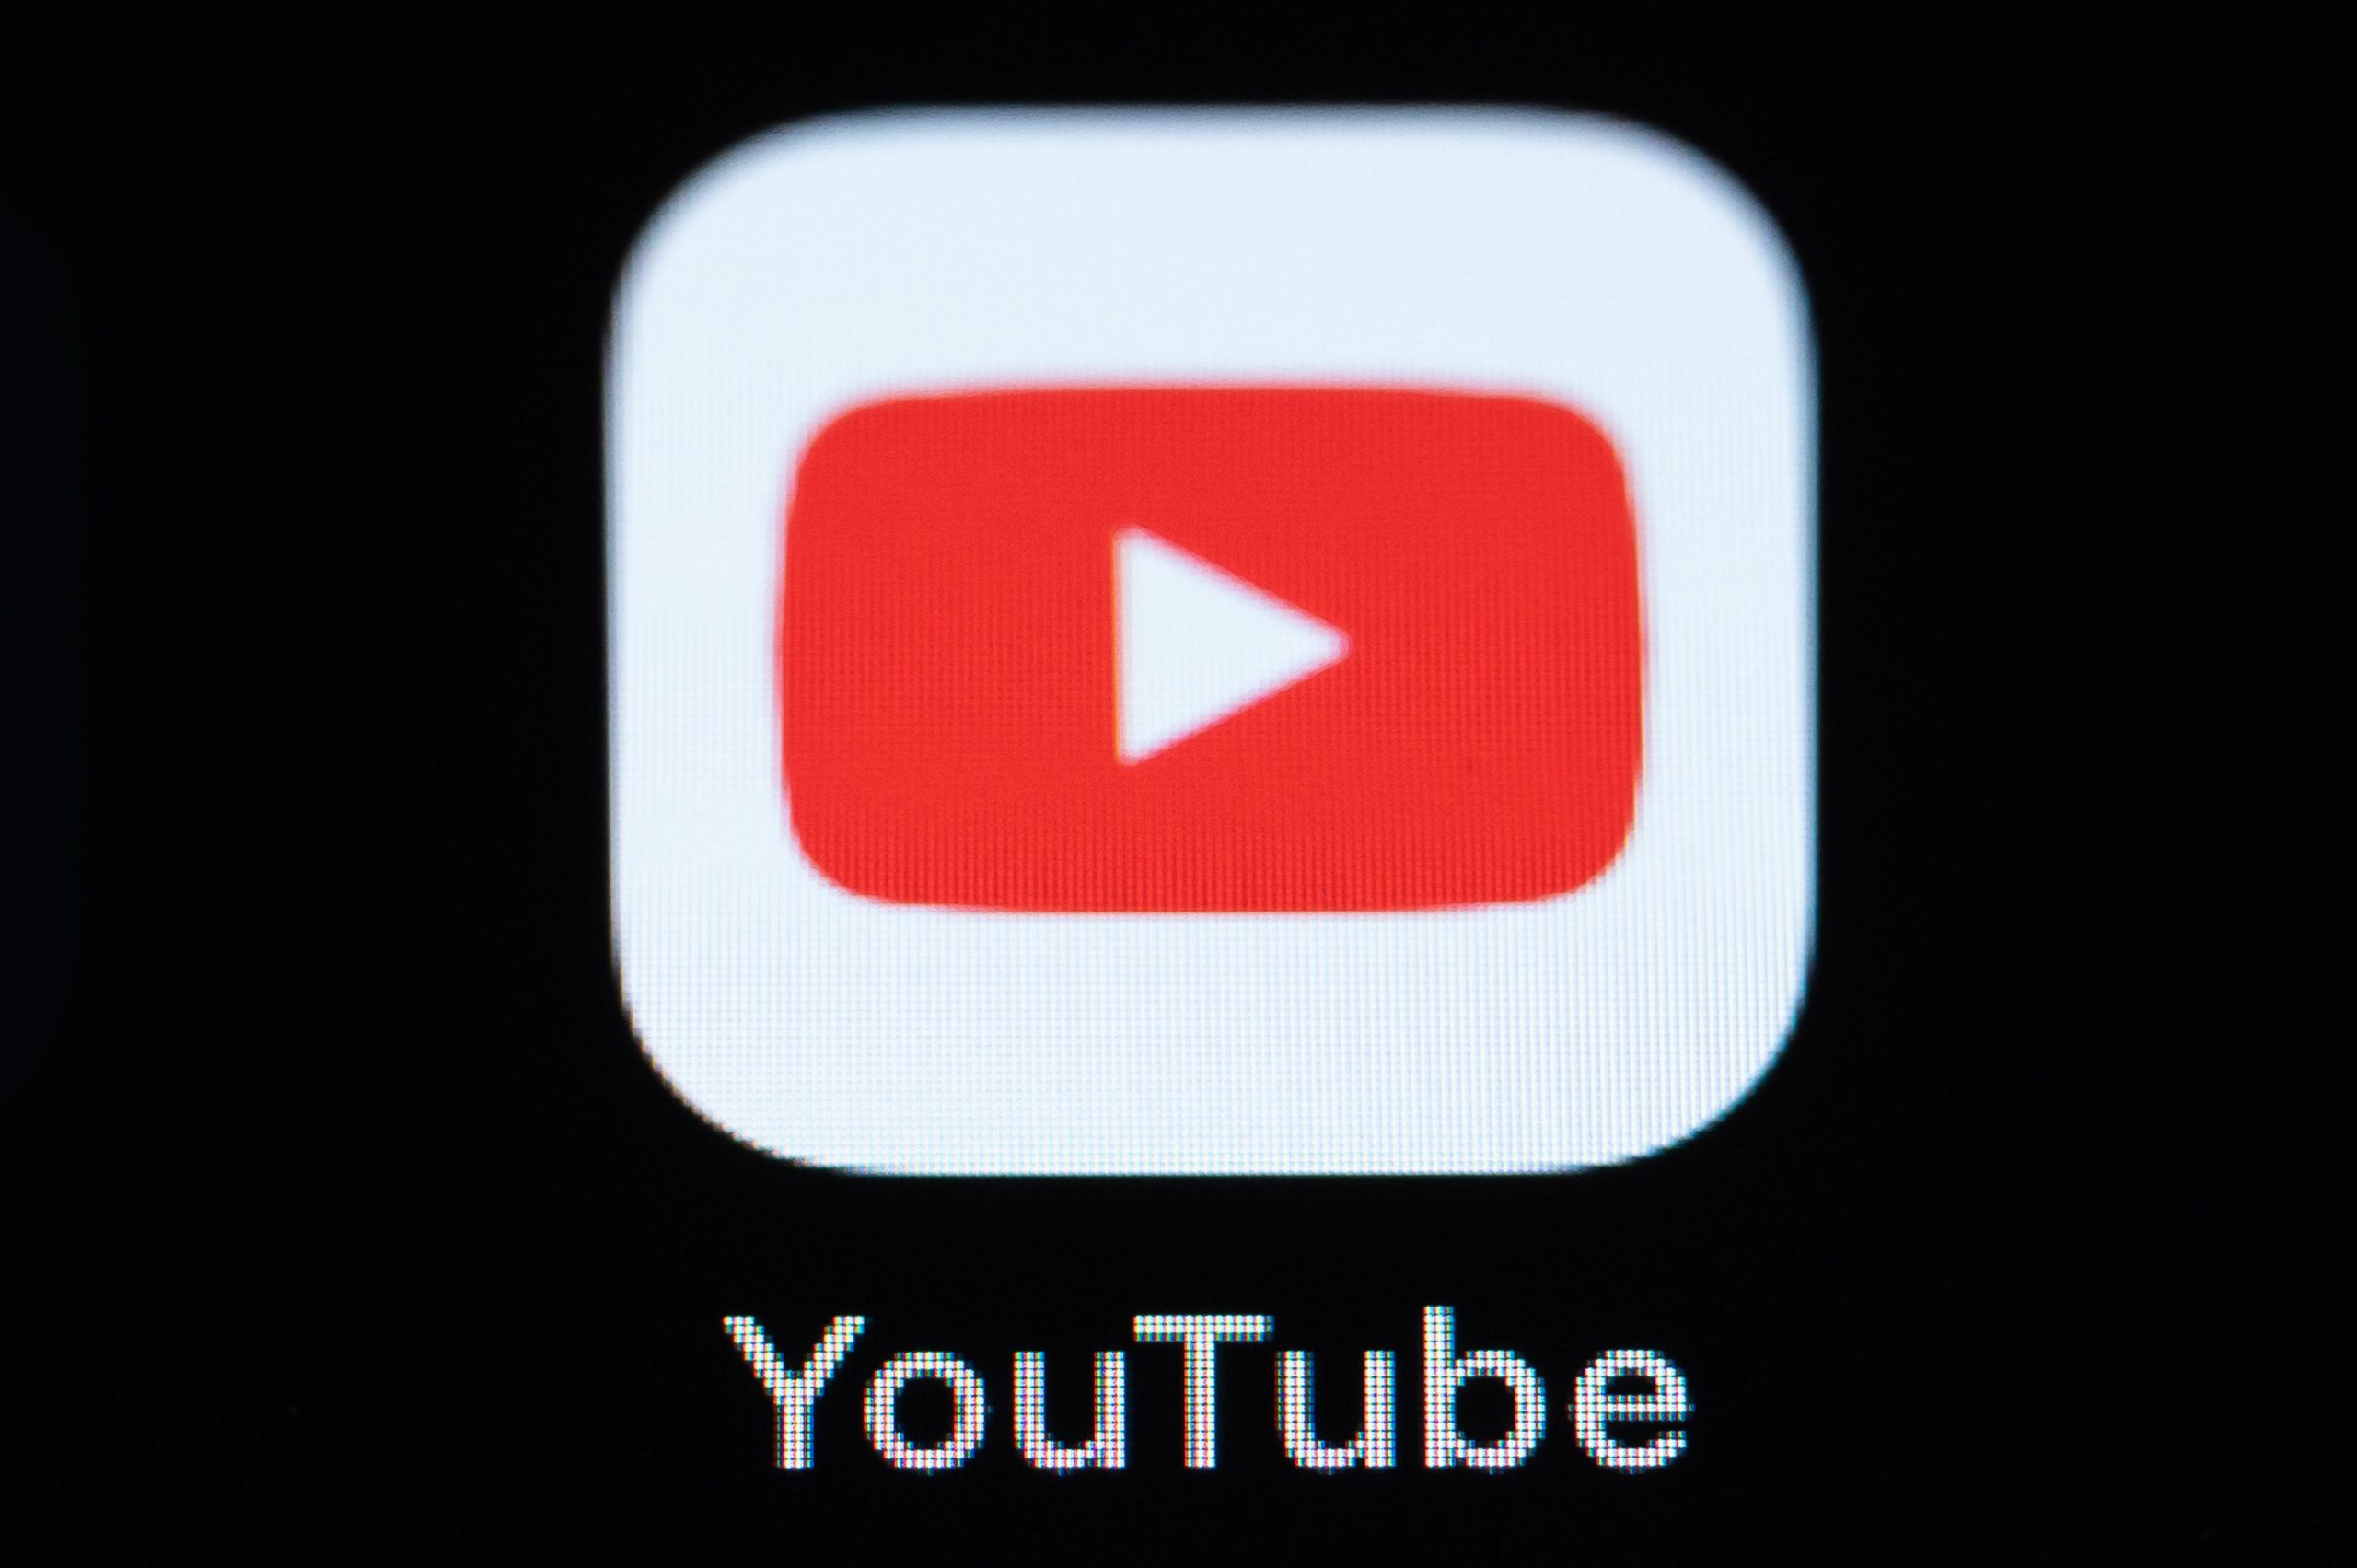 YouTube is adjusting its swearing policy thanks to creator backlash